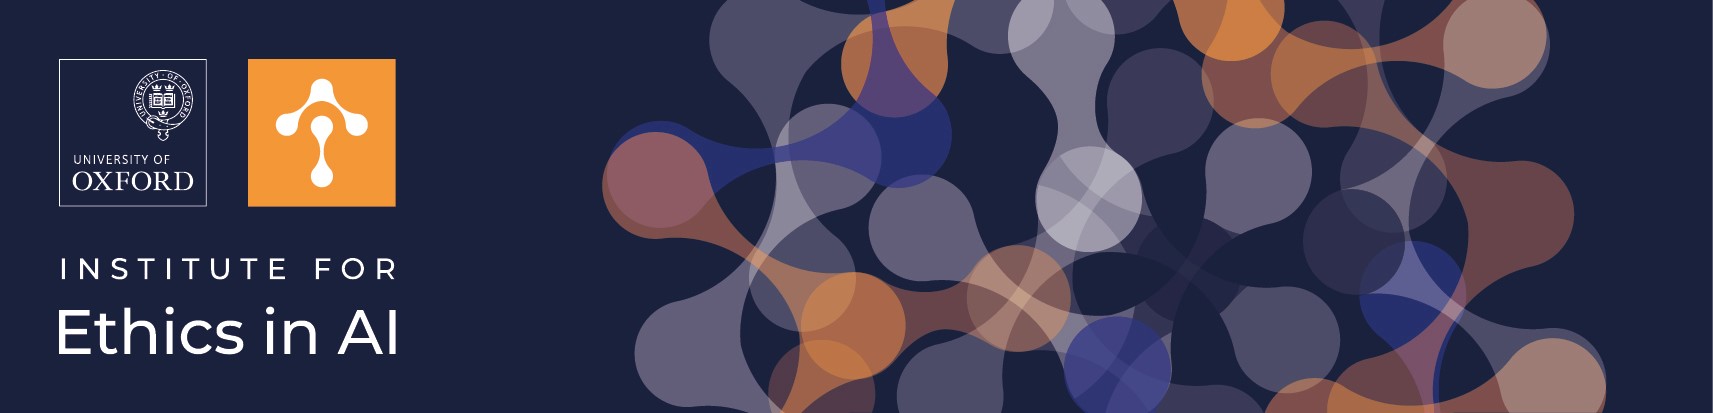 Institute for Ethics in AI logo on a dark blue graphics background